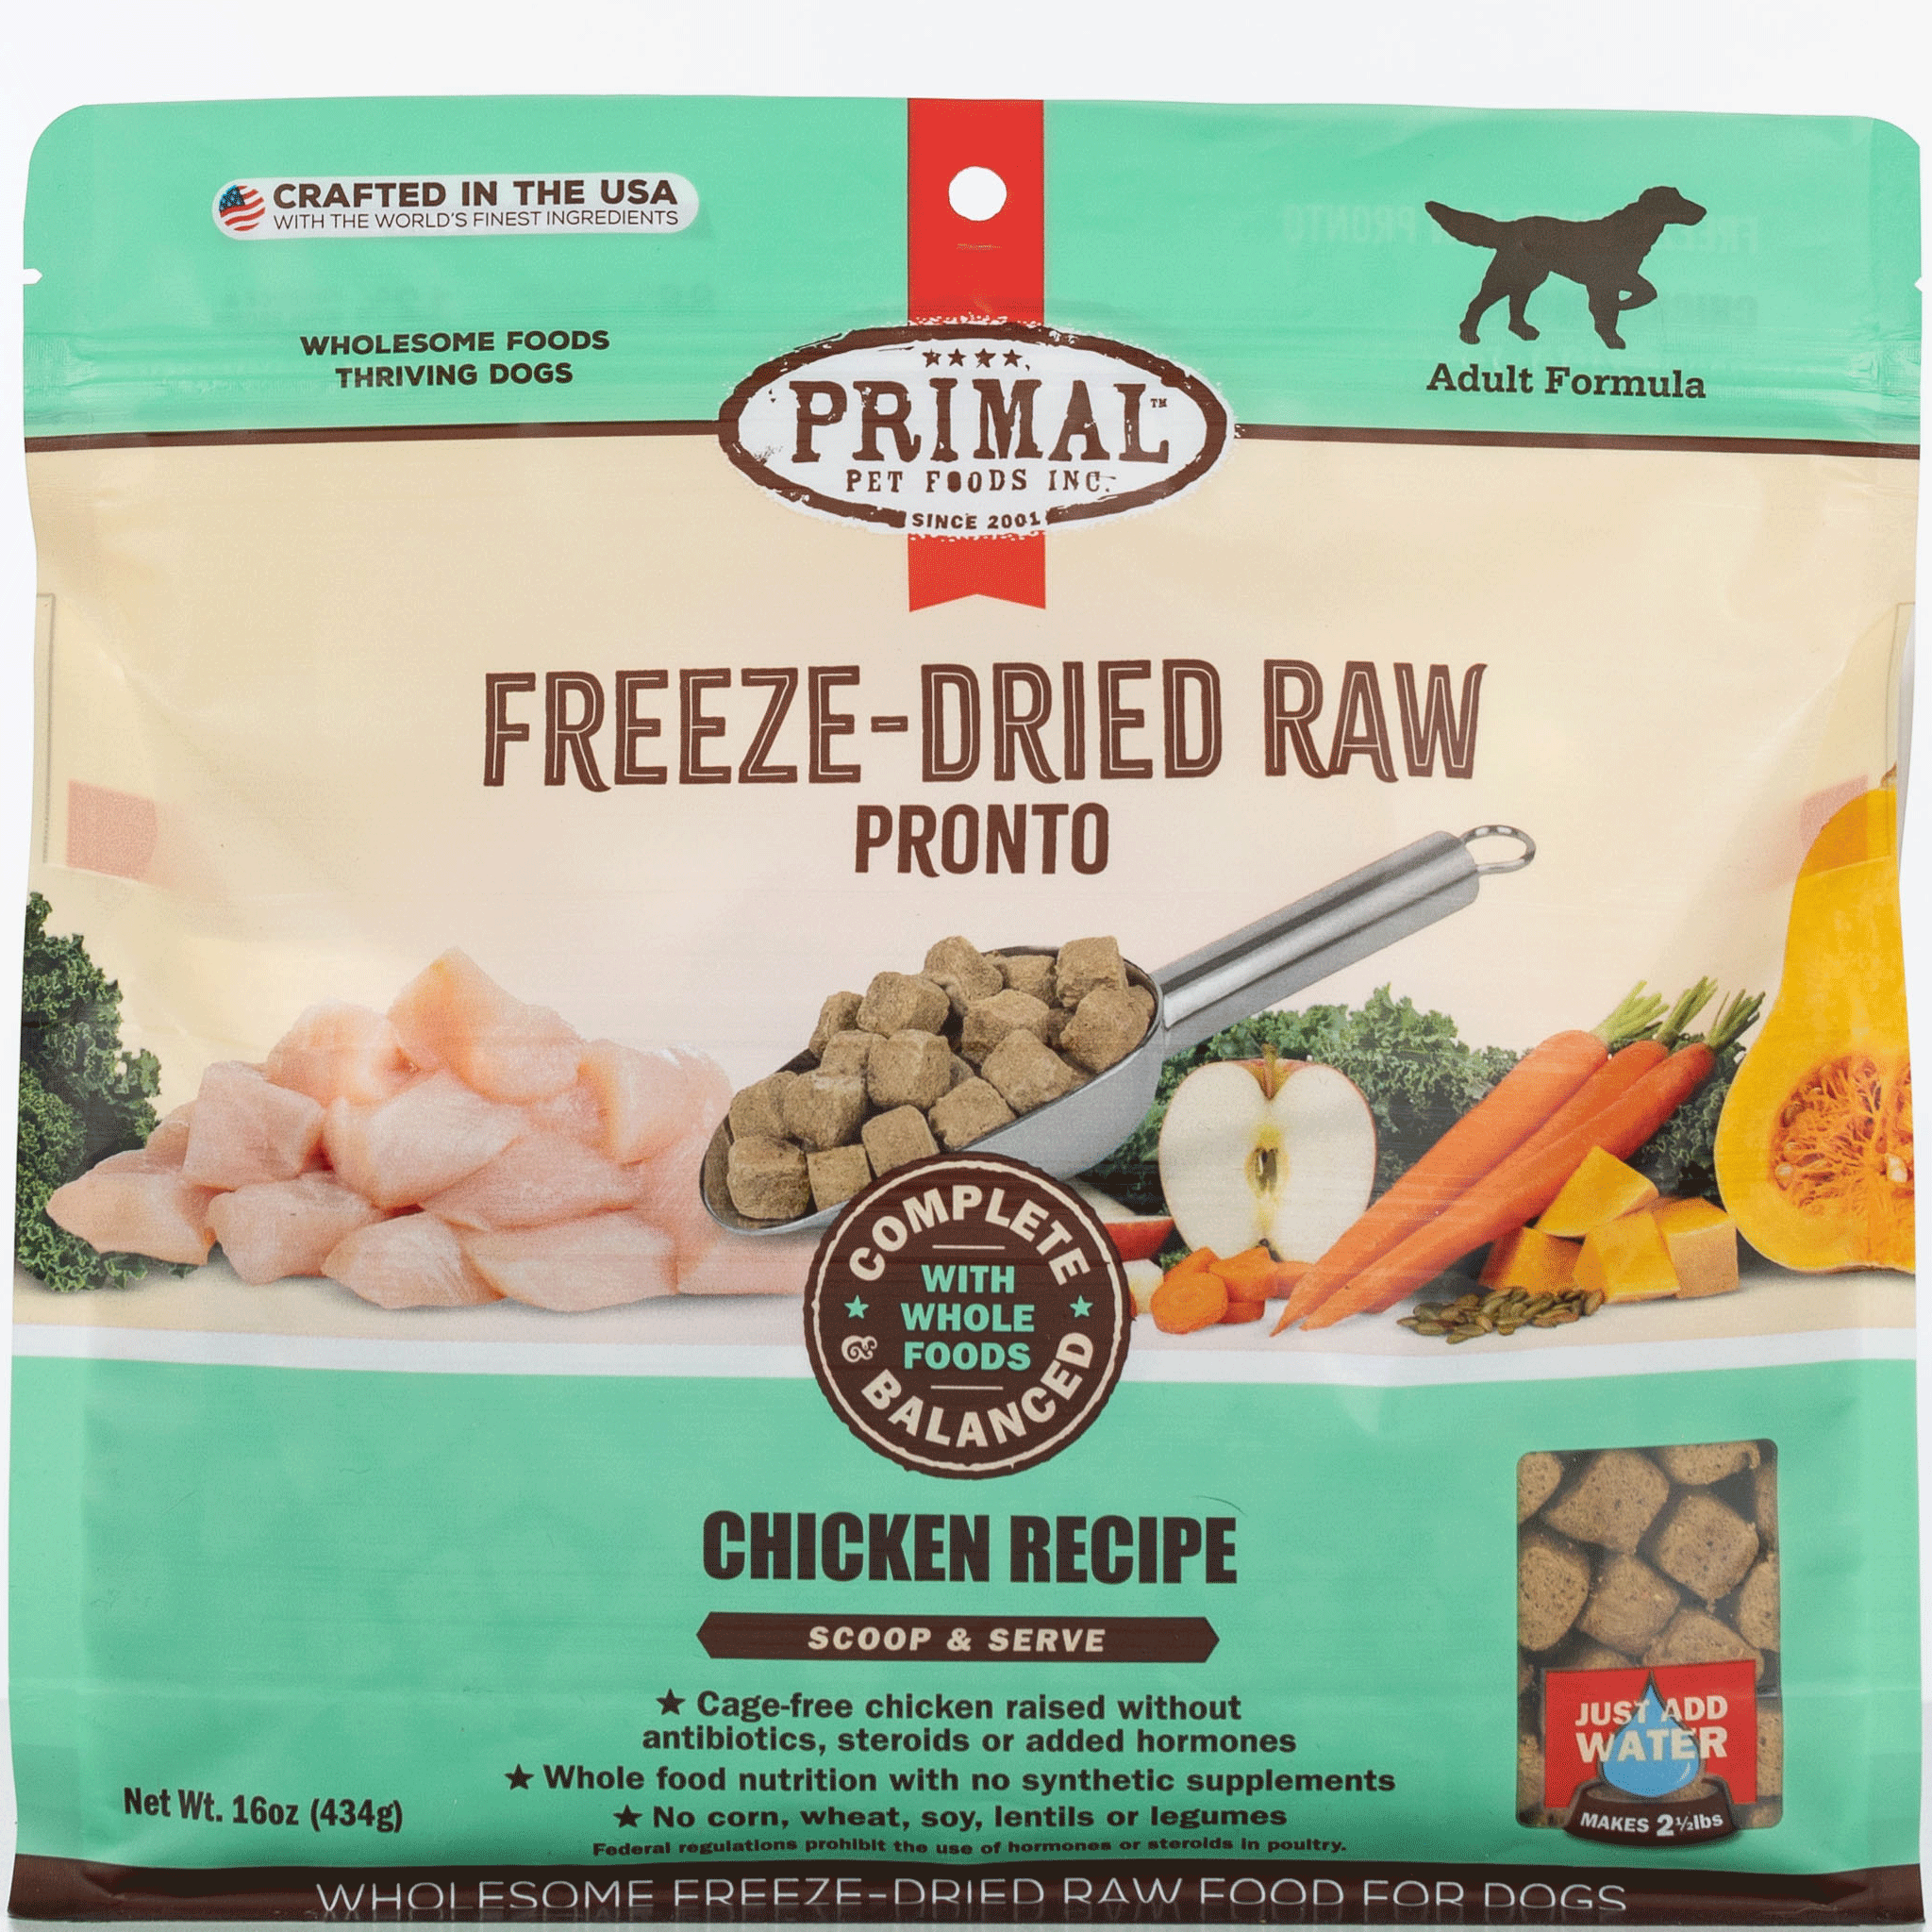 https://cdn.shopify.com/s/files/1/0995/5684/products/Primal_Freeze-Dried_Chicken_Pronto_Dog_Food_16oz_Front_Image.gif?v=1668813365